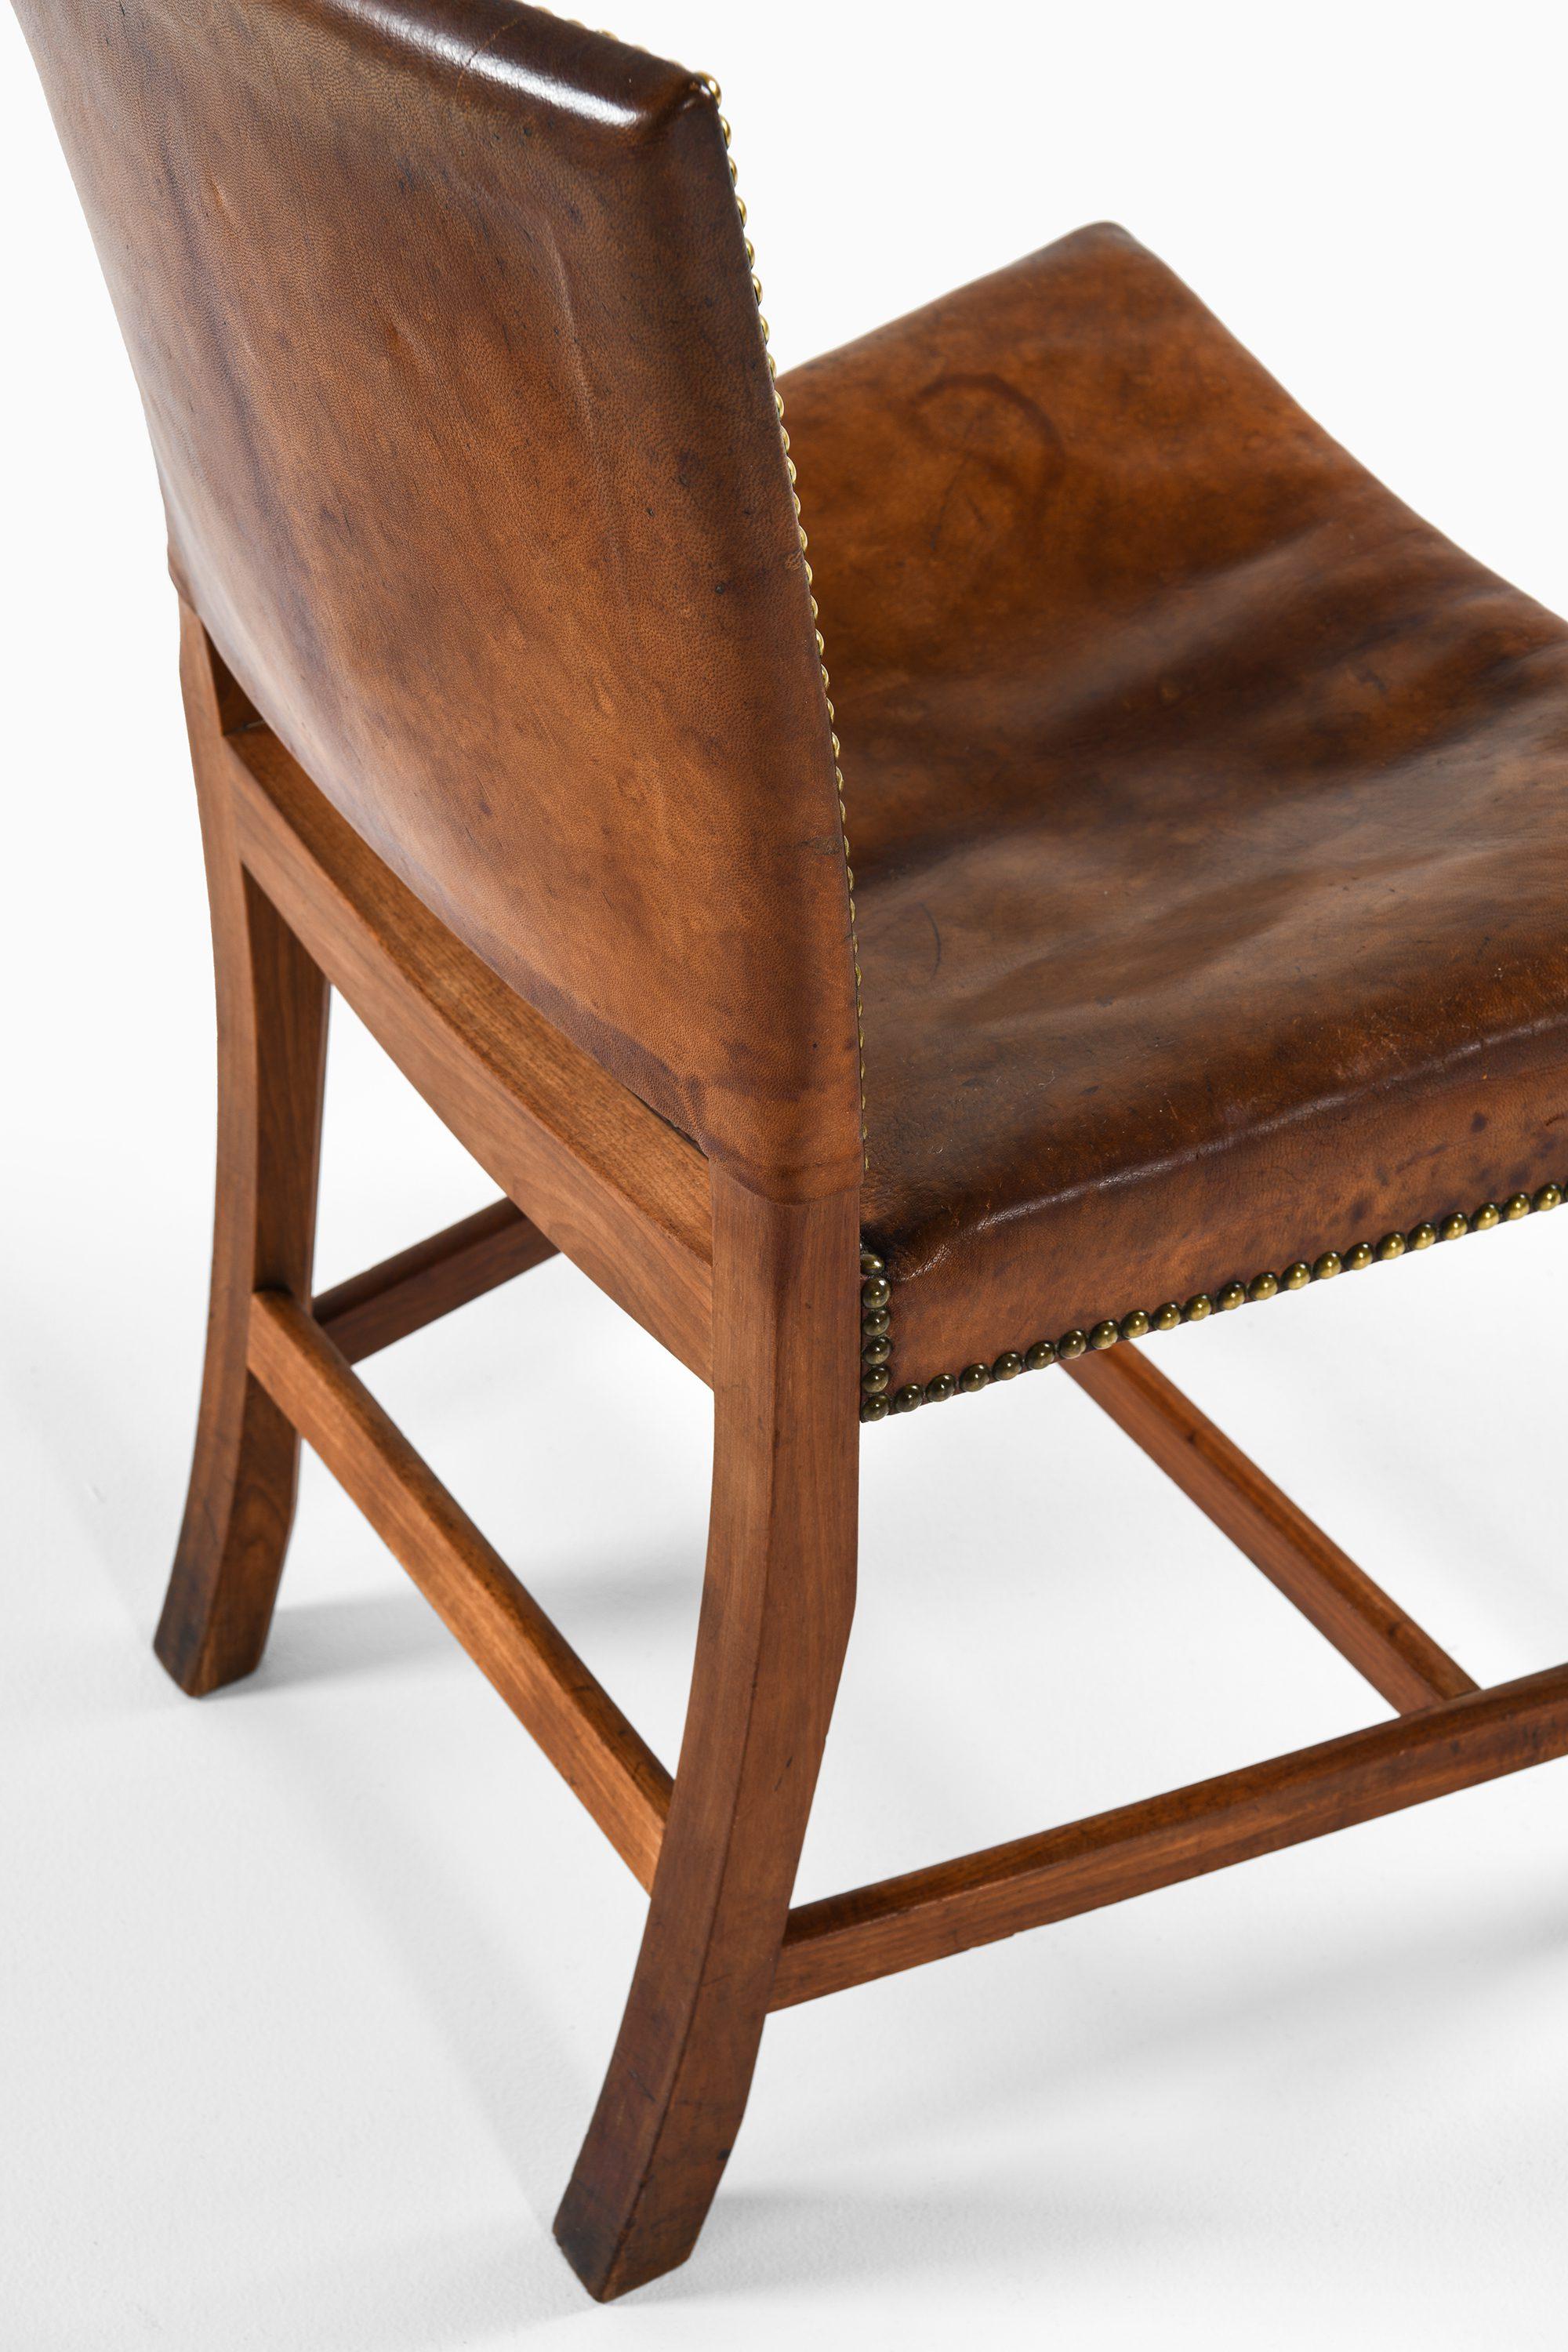 Danish Set of 4 Chairs in Mahogany and Leather by Kaare Klint Dining, 1930s For Sale